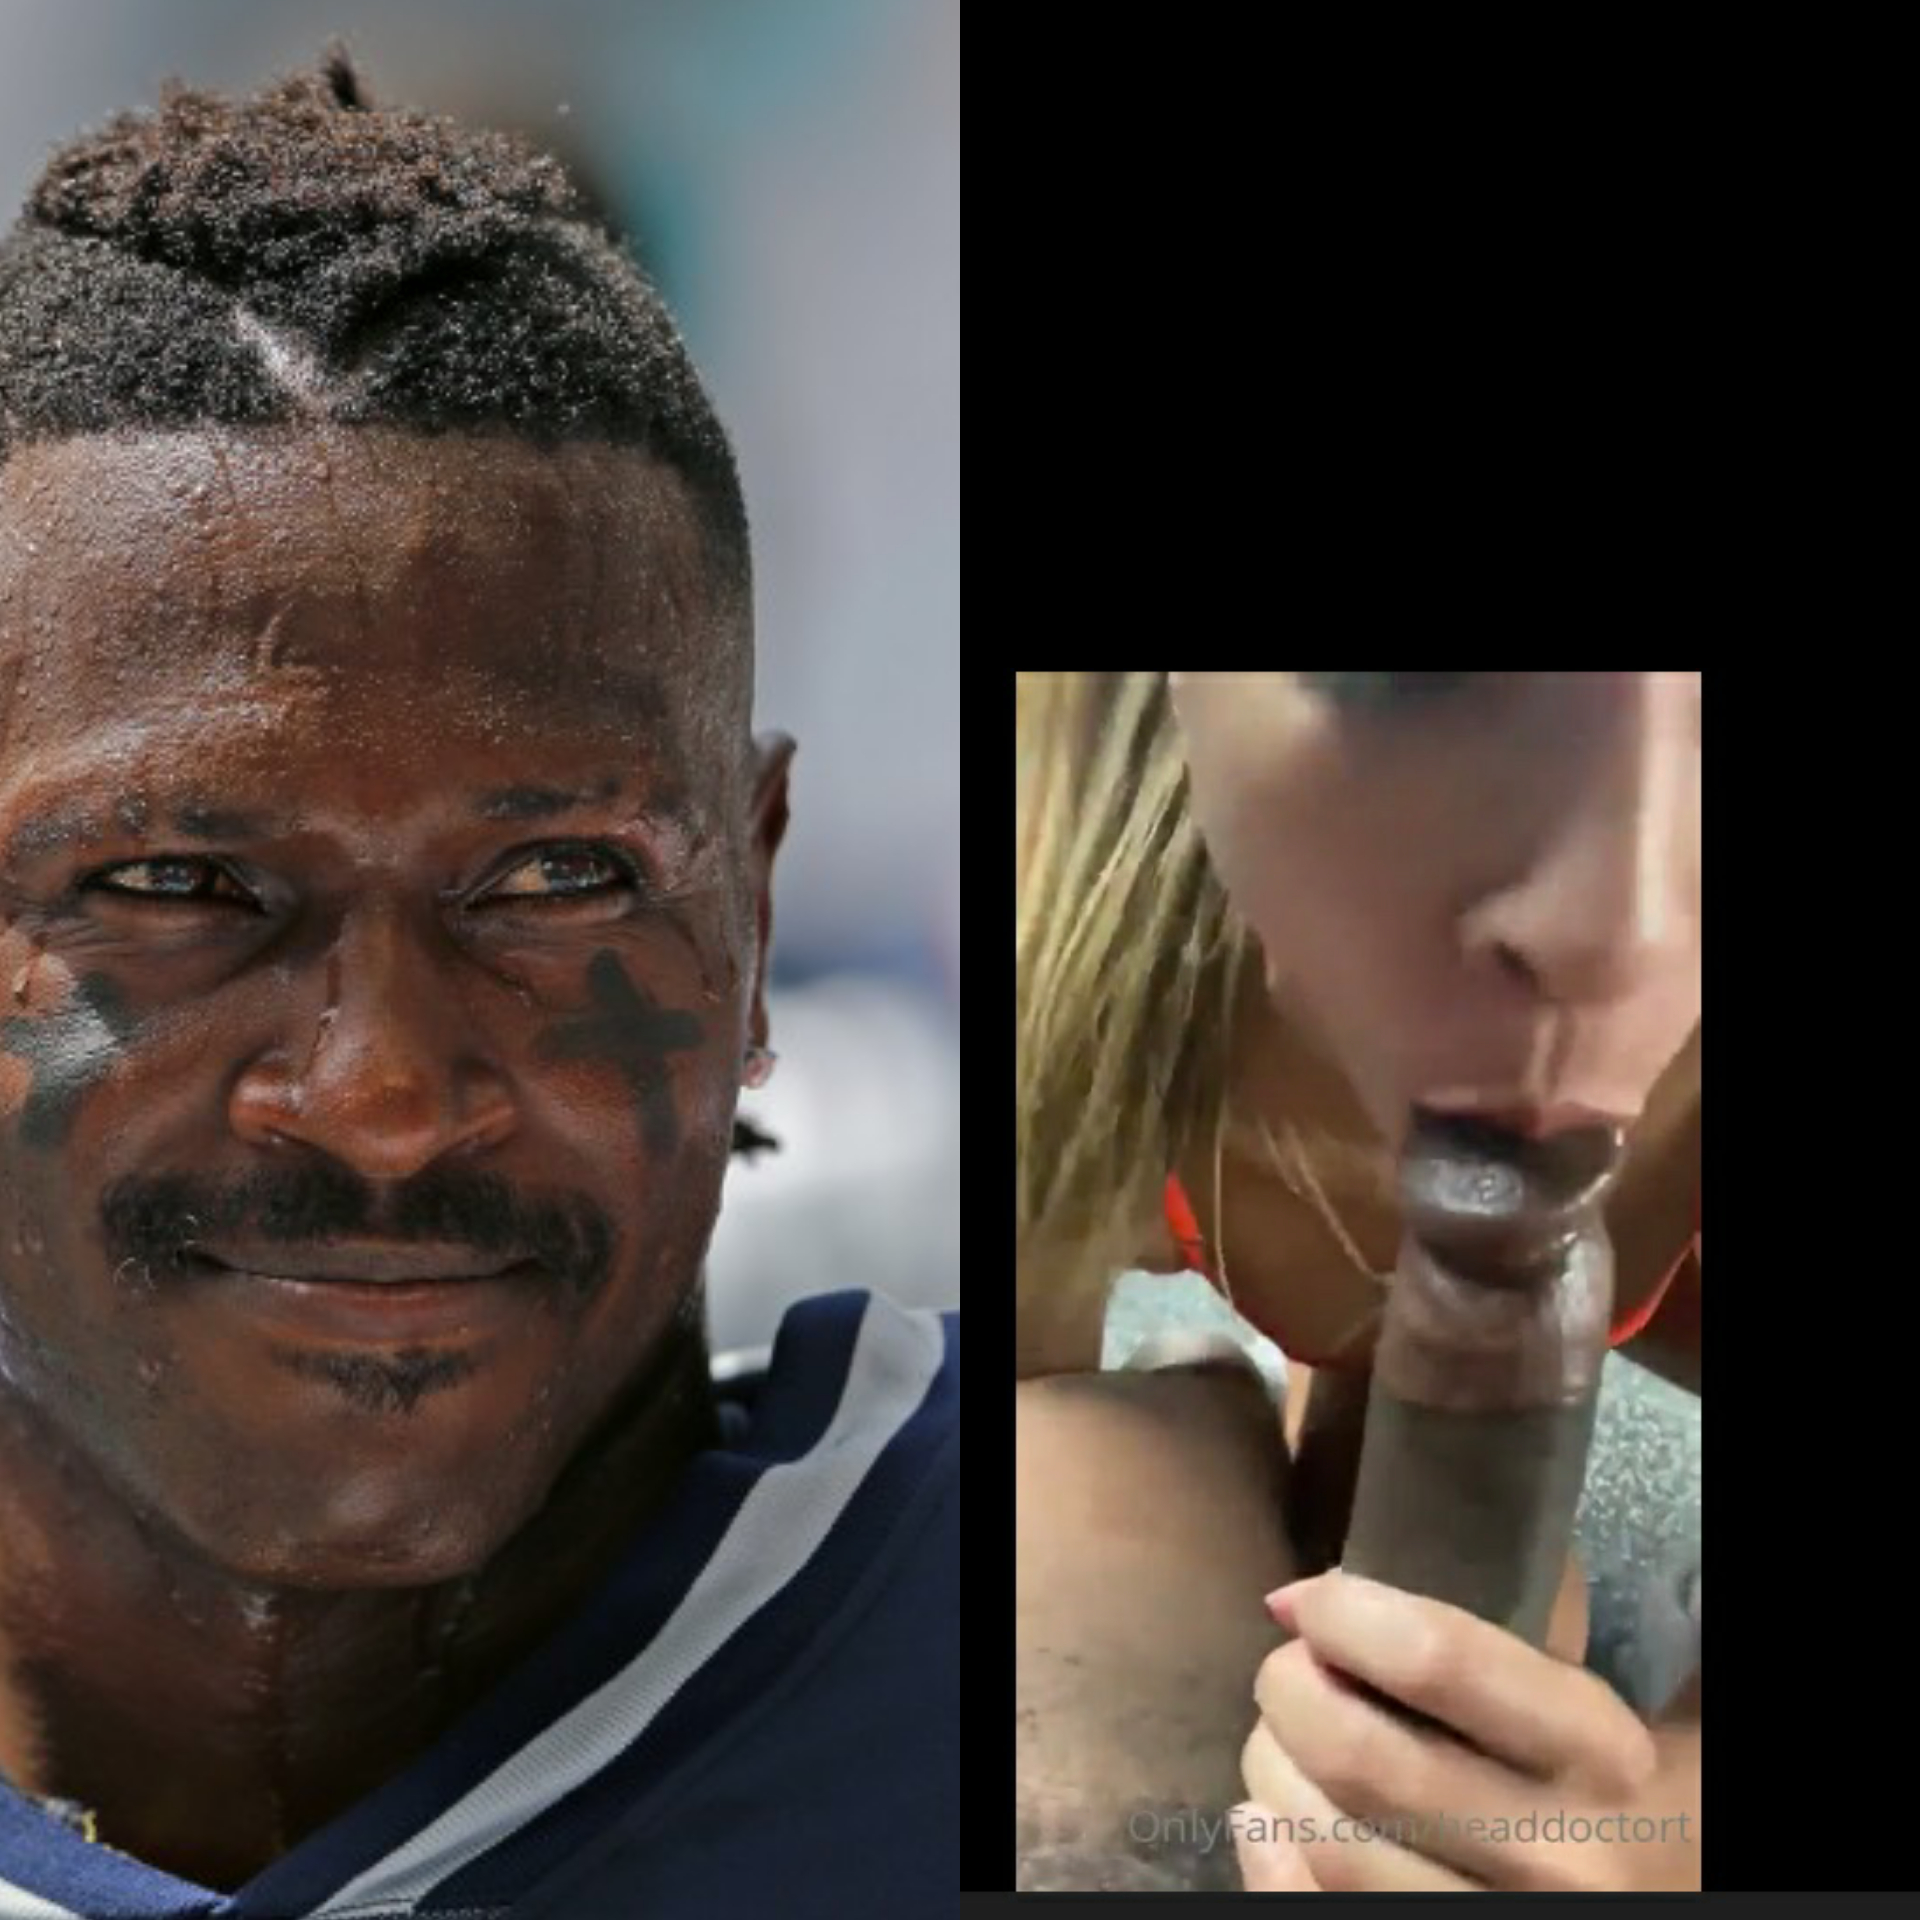 NFL Baller Antonio Brown Getting Some Top By A Porn Starlet? 